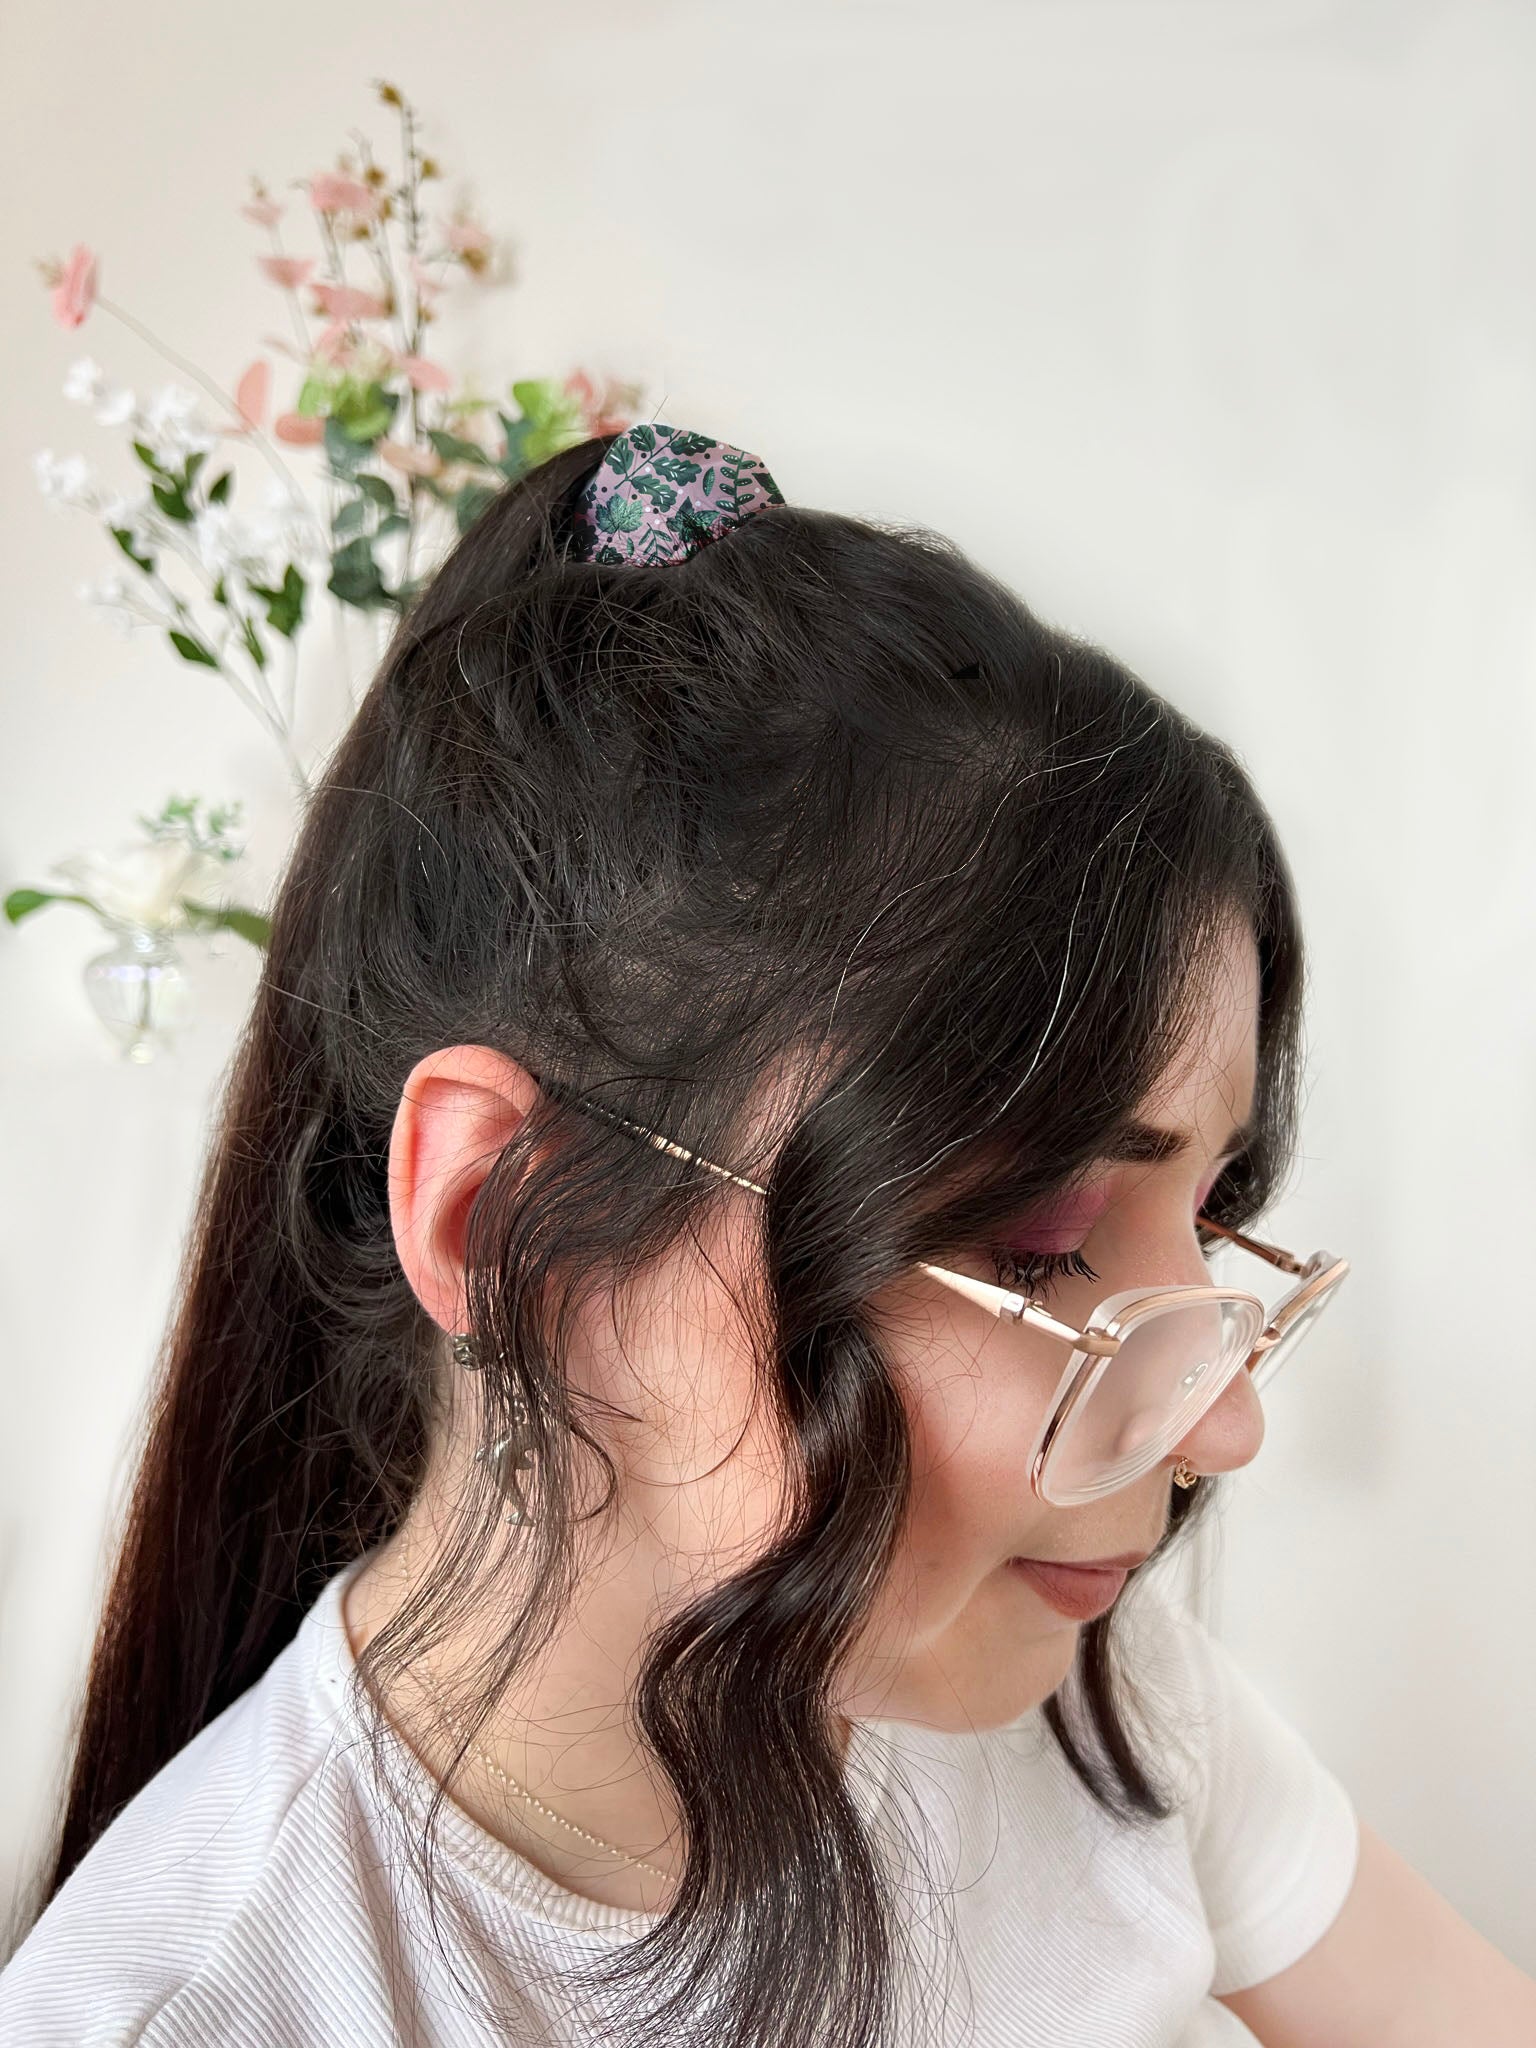 dark haired girl wears scrunchie in a green foliage pattern holding a ponytail